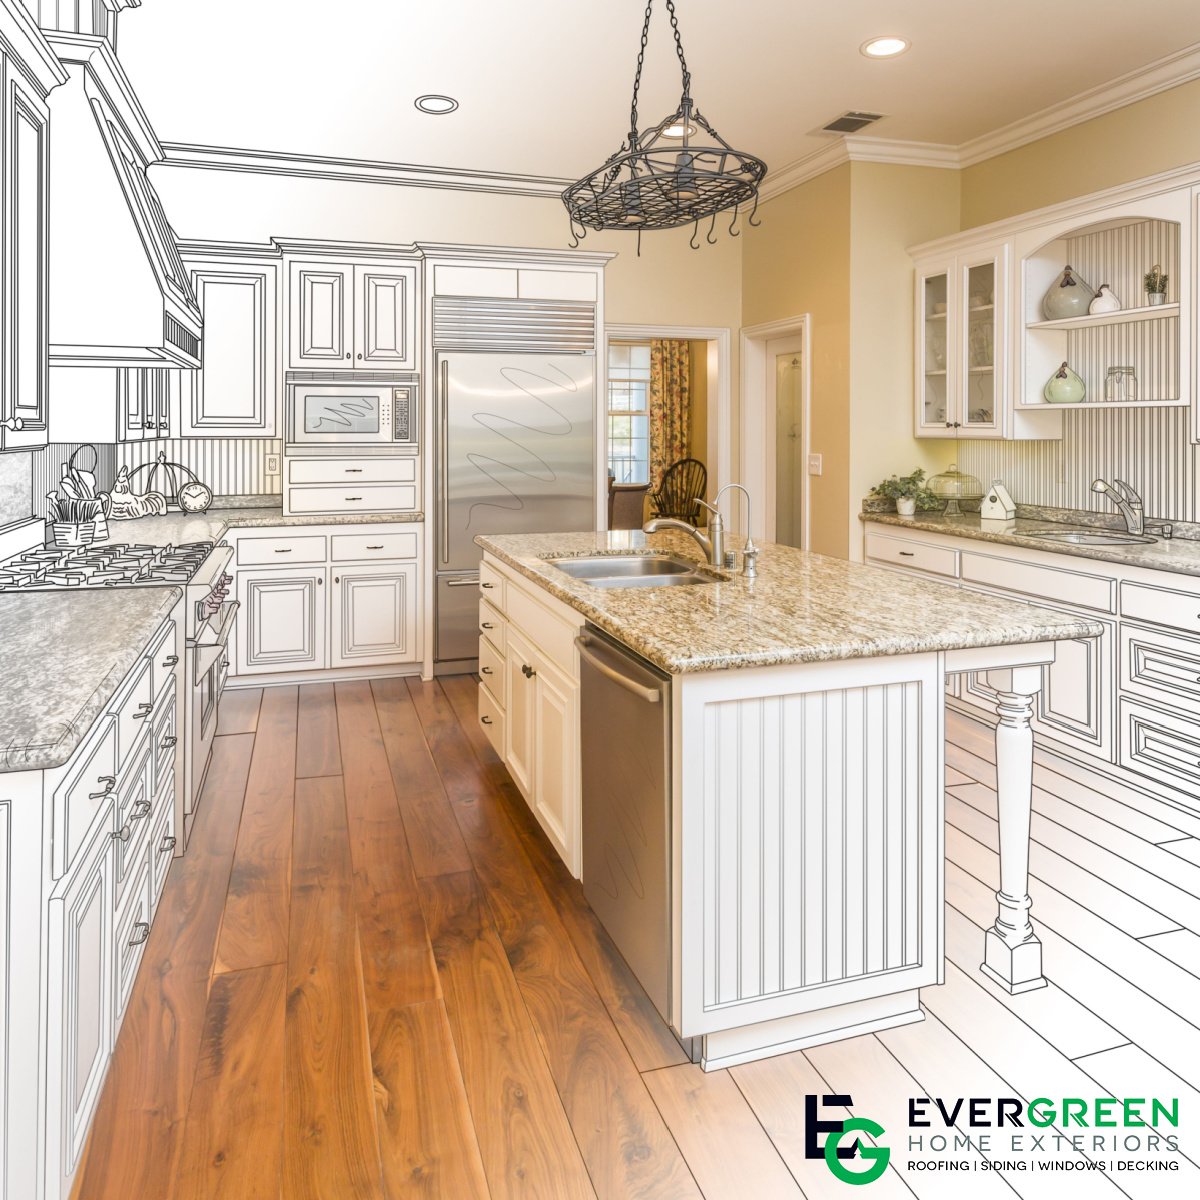 Upgrade Your Silverdale Kitchen with Evergreen Home Exteriors’ Craftsmanship